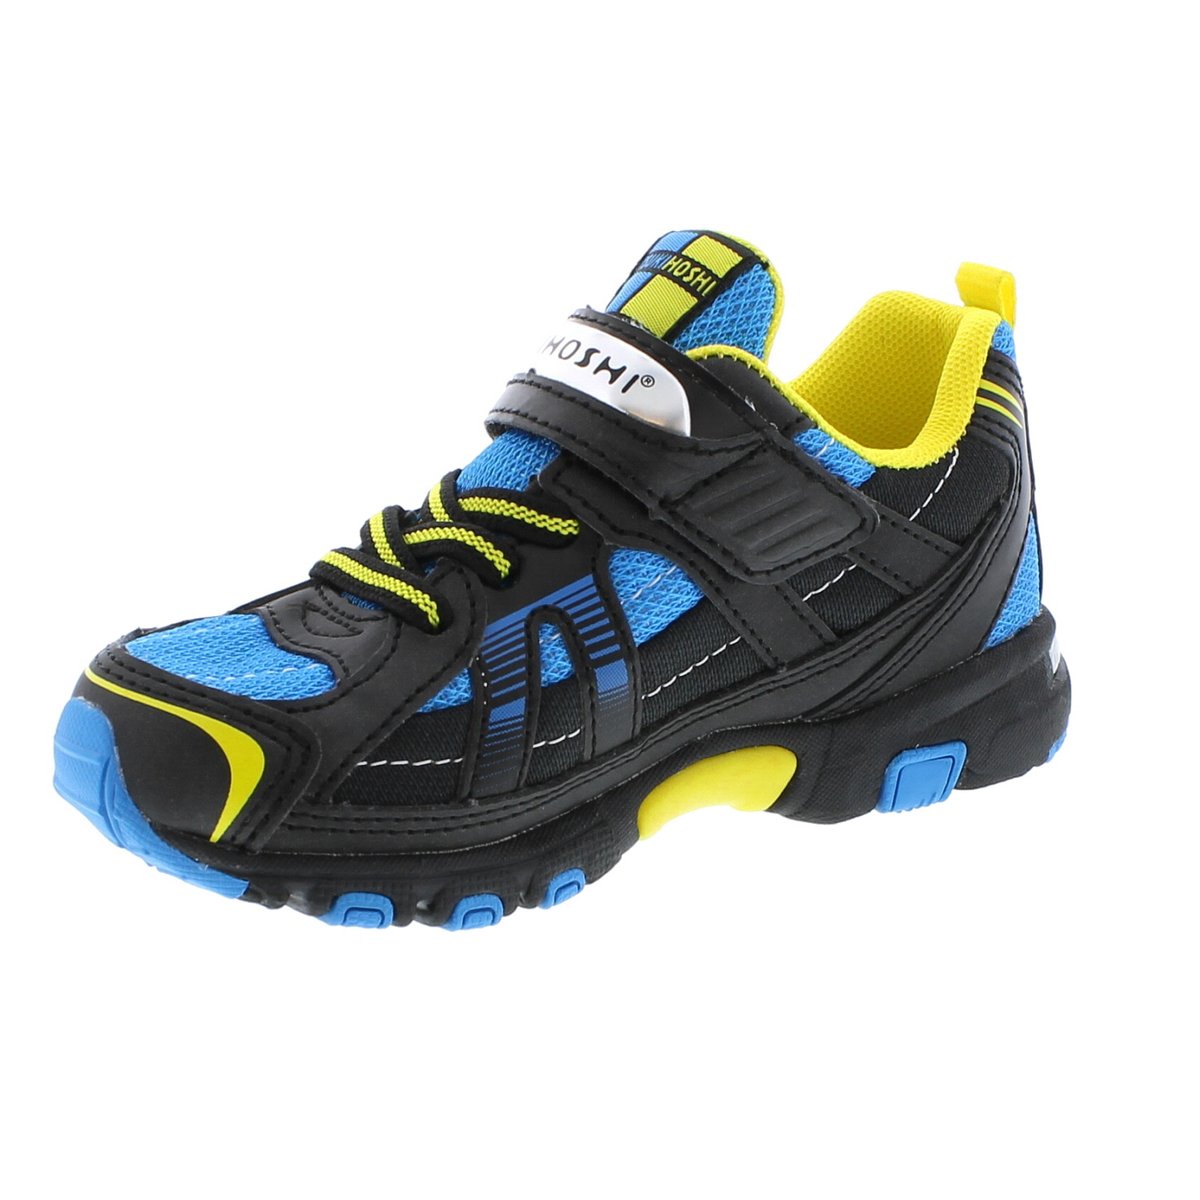 Child Tsukihoshi Storm Sneaker in Black/Blue from the front view